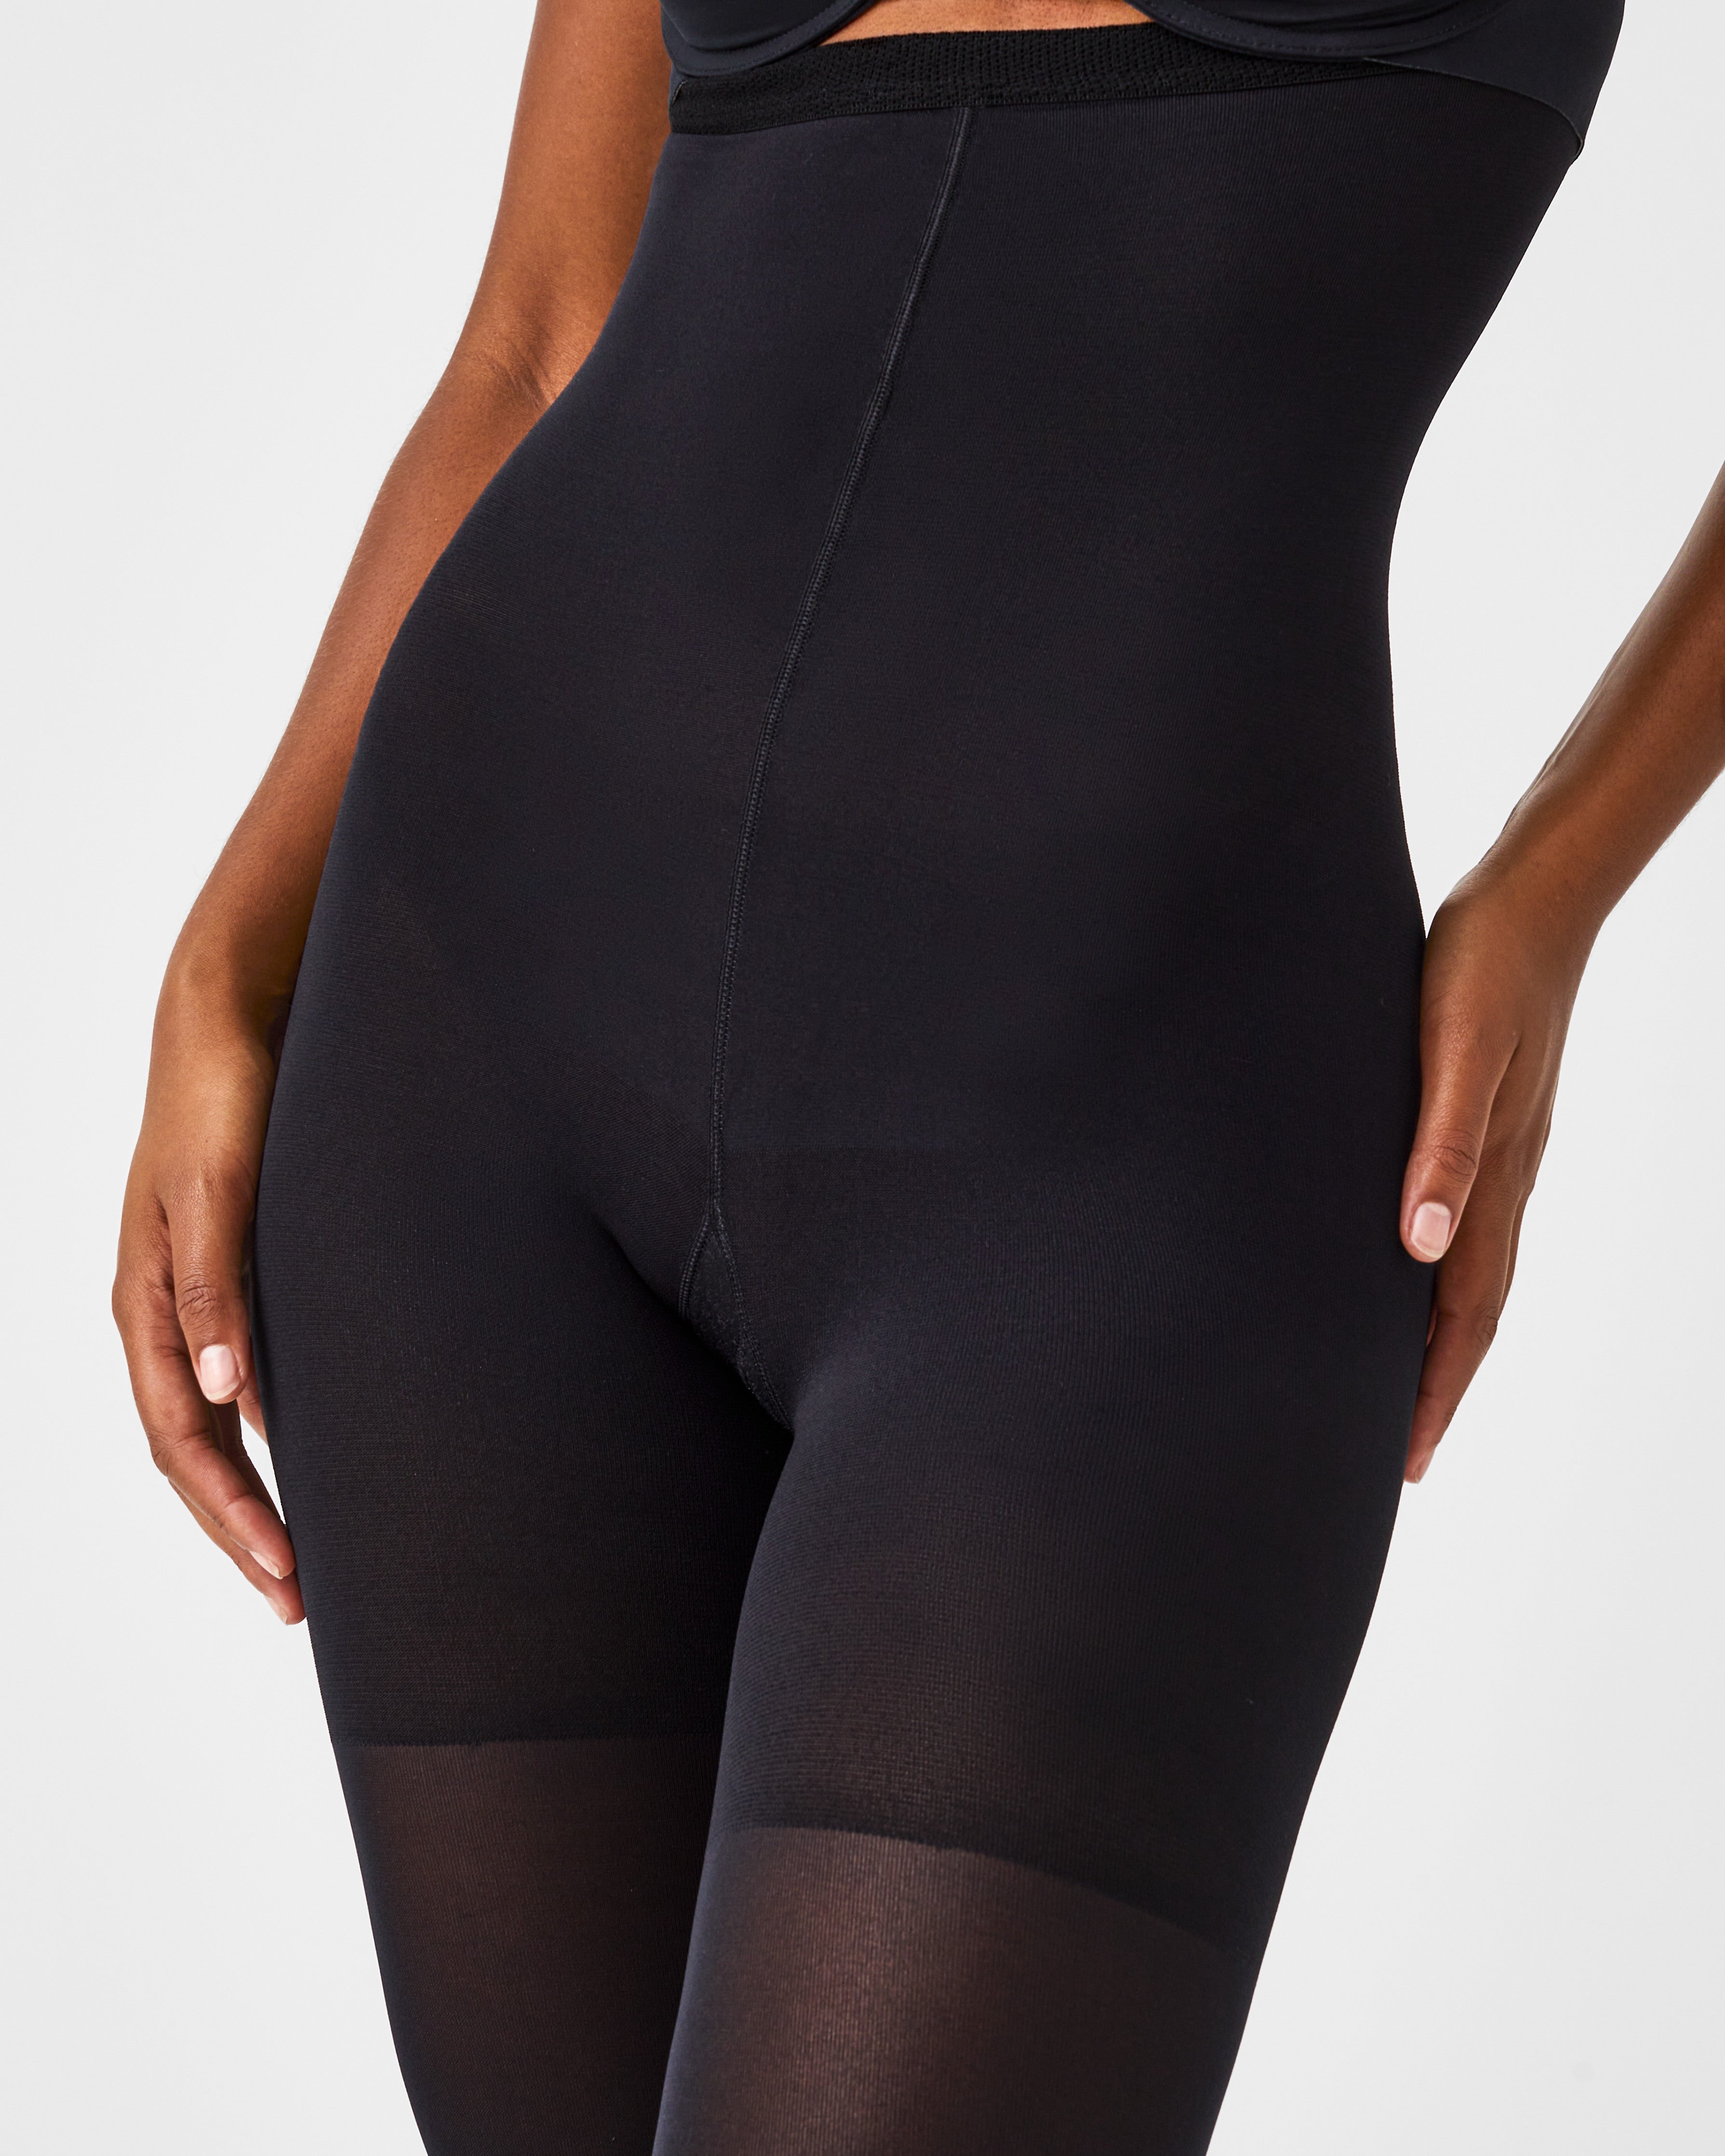 😊$9.99 (Reg $30) SPANX Arm Tights! Deal ends September 24th, at 6 AM PST!  👆 Find the direct link in my bio OR Go to: 👉🏻Tin